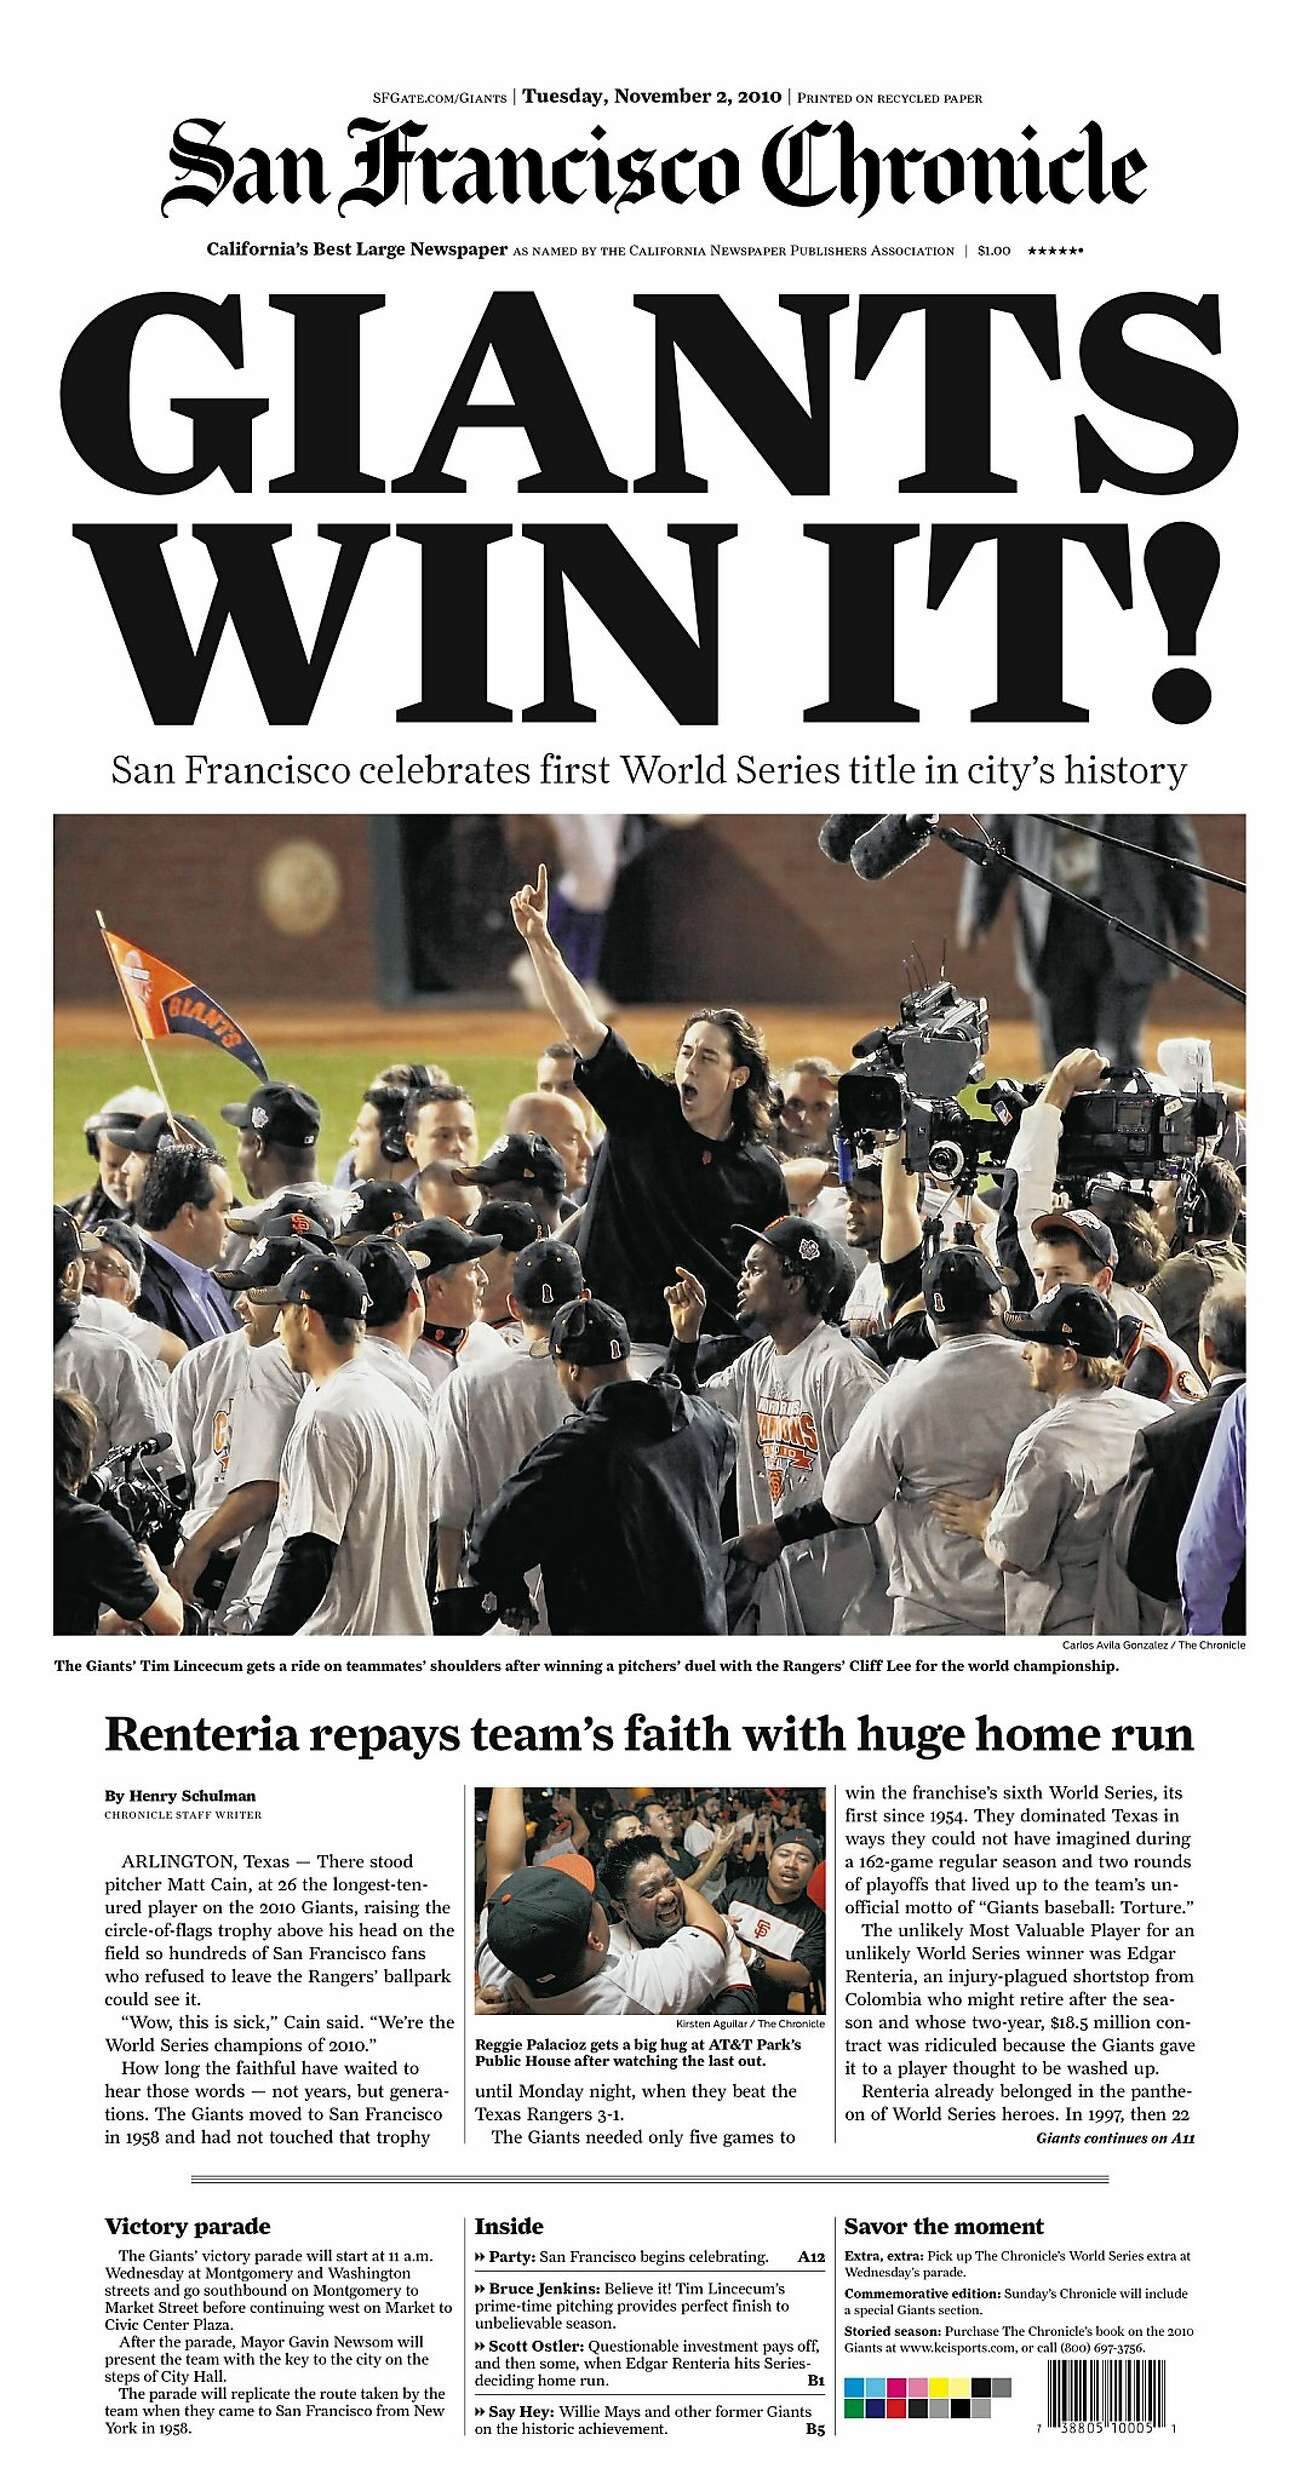 On This Day 10 Years Ago, November 1st, 2010 - World Series Champions, By  San Francisco Giants